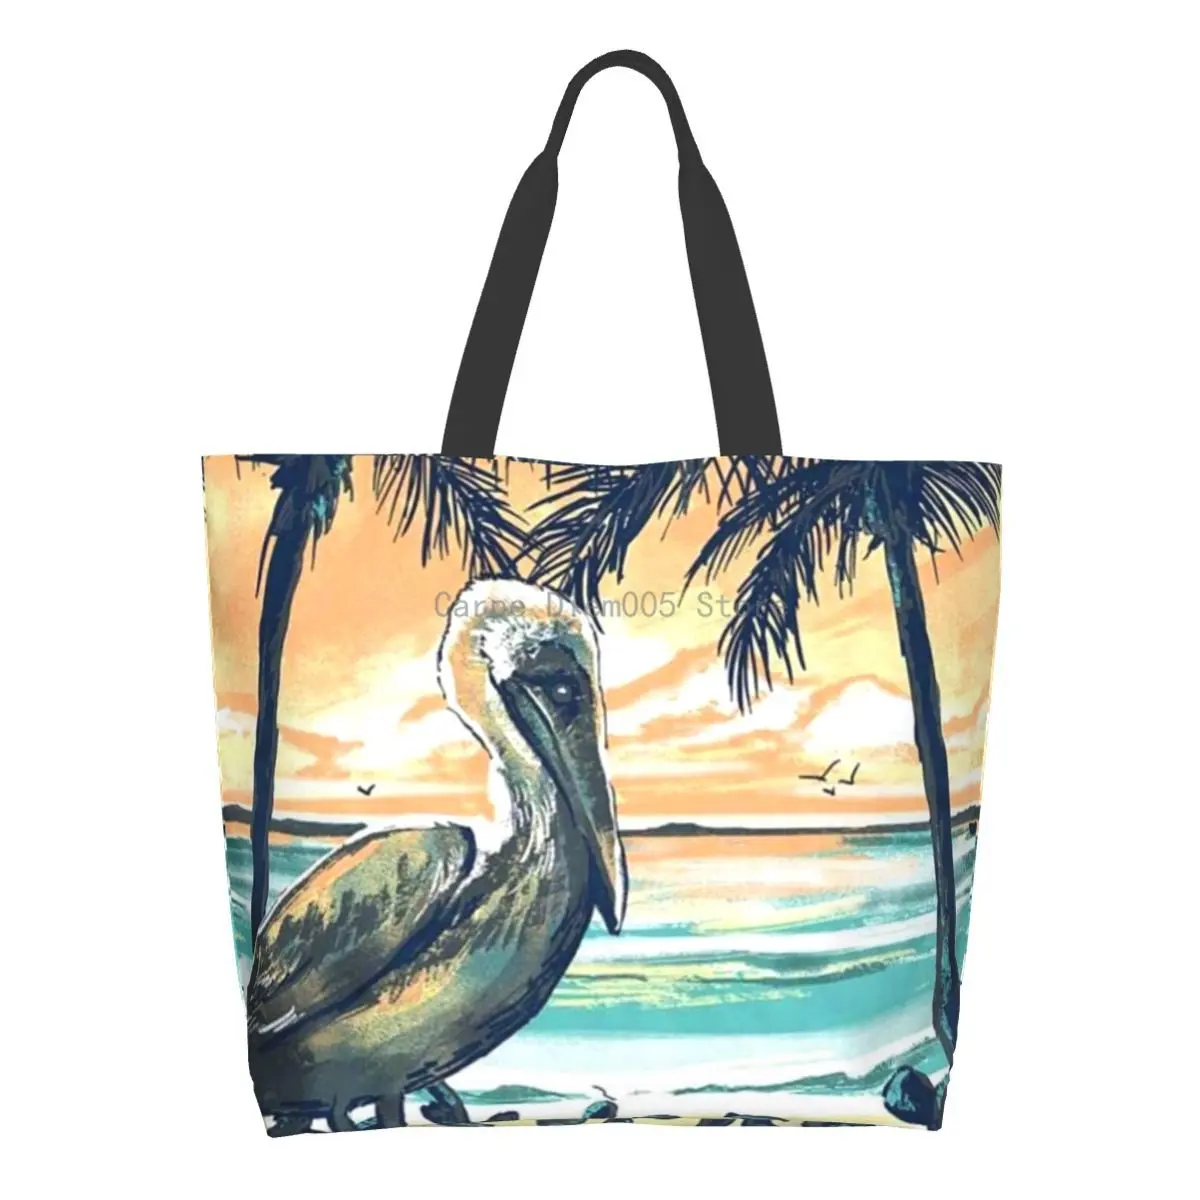 

Women Shoulder Bag Pelican Sunset Large Capacity Shopping Grocery Tote Bag For Ladies